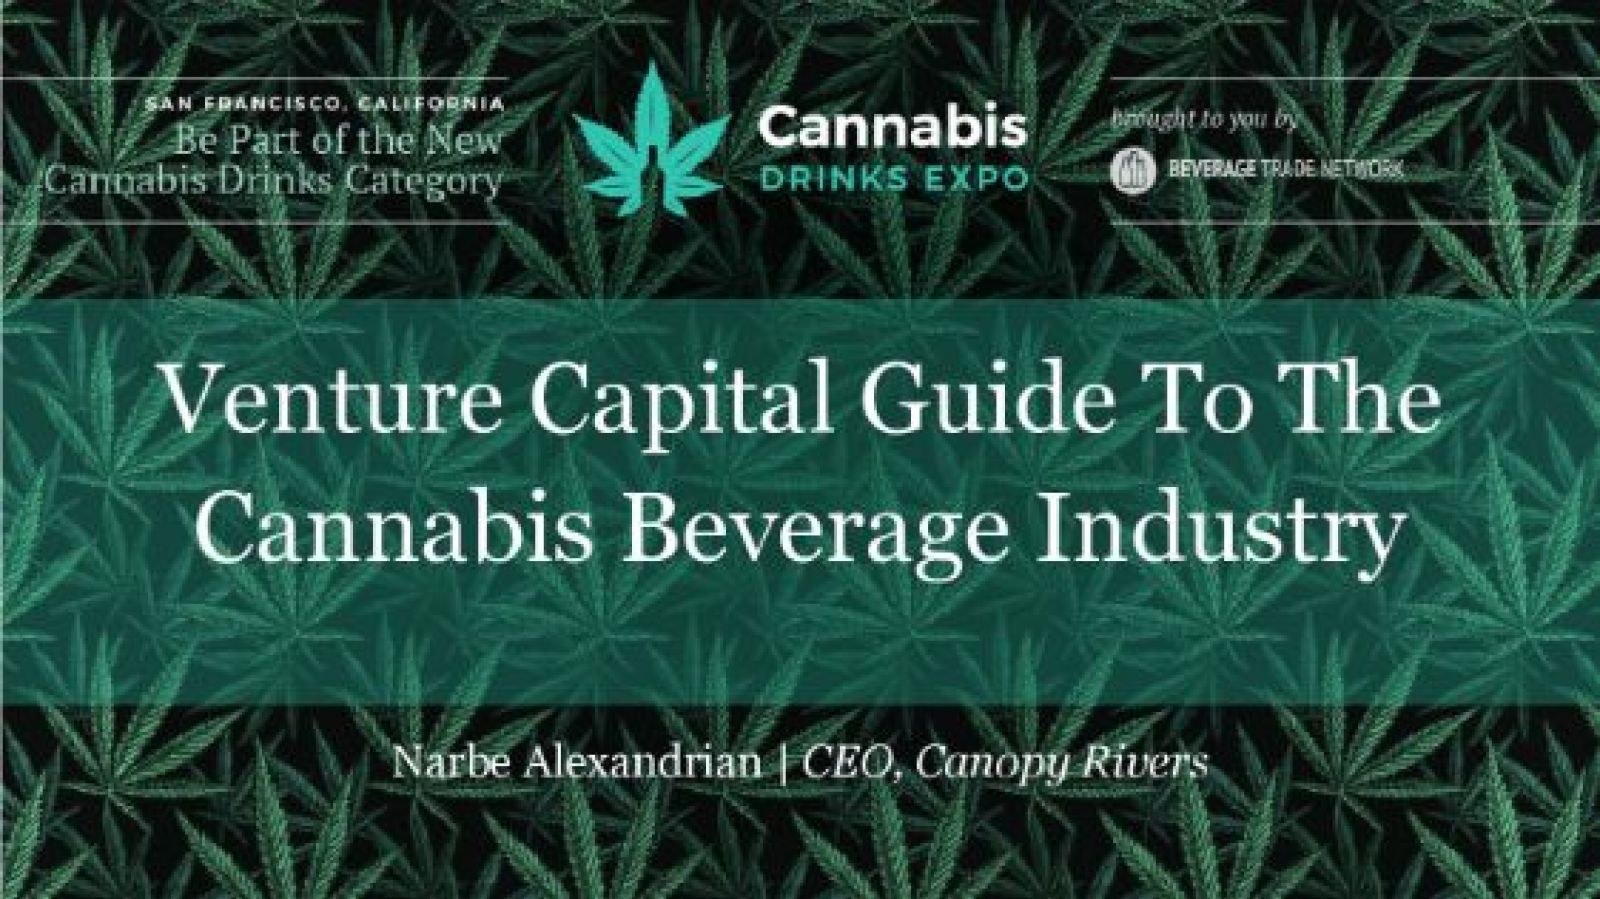 Photo for: Venture Capital Guide to the Cannabis Beverage Industry: CDE Conference